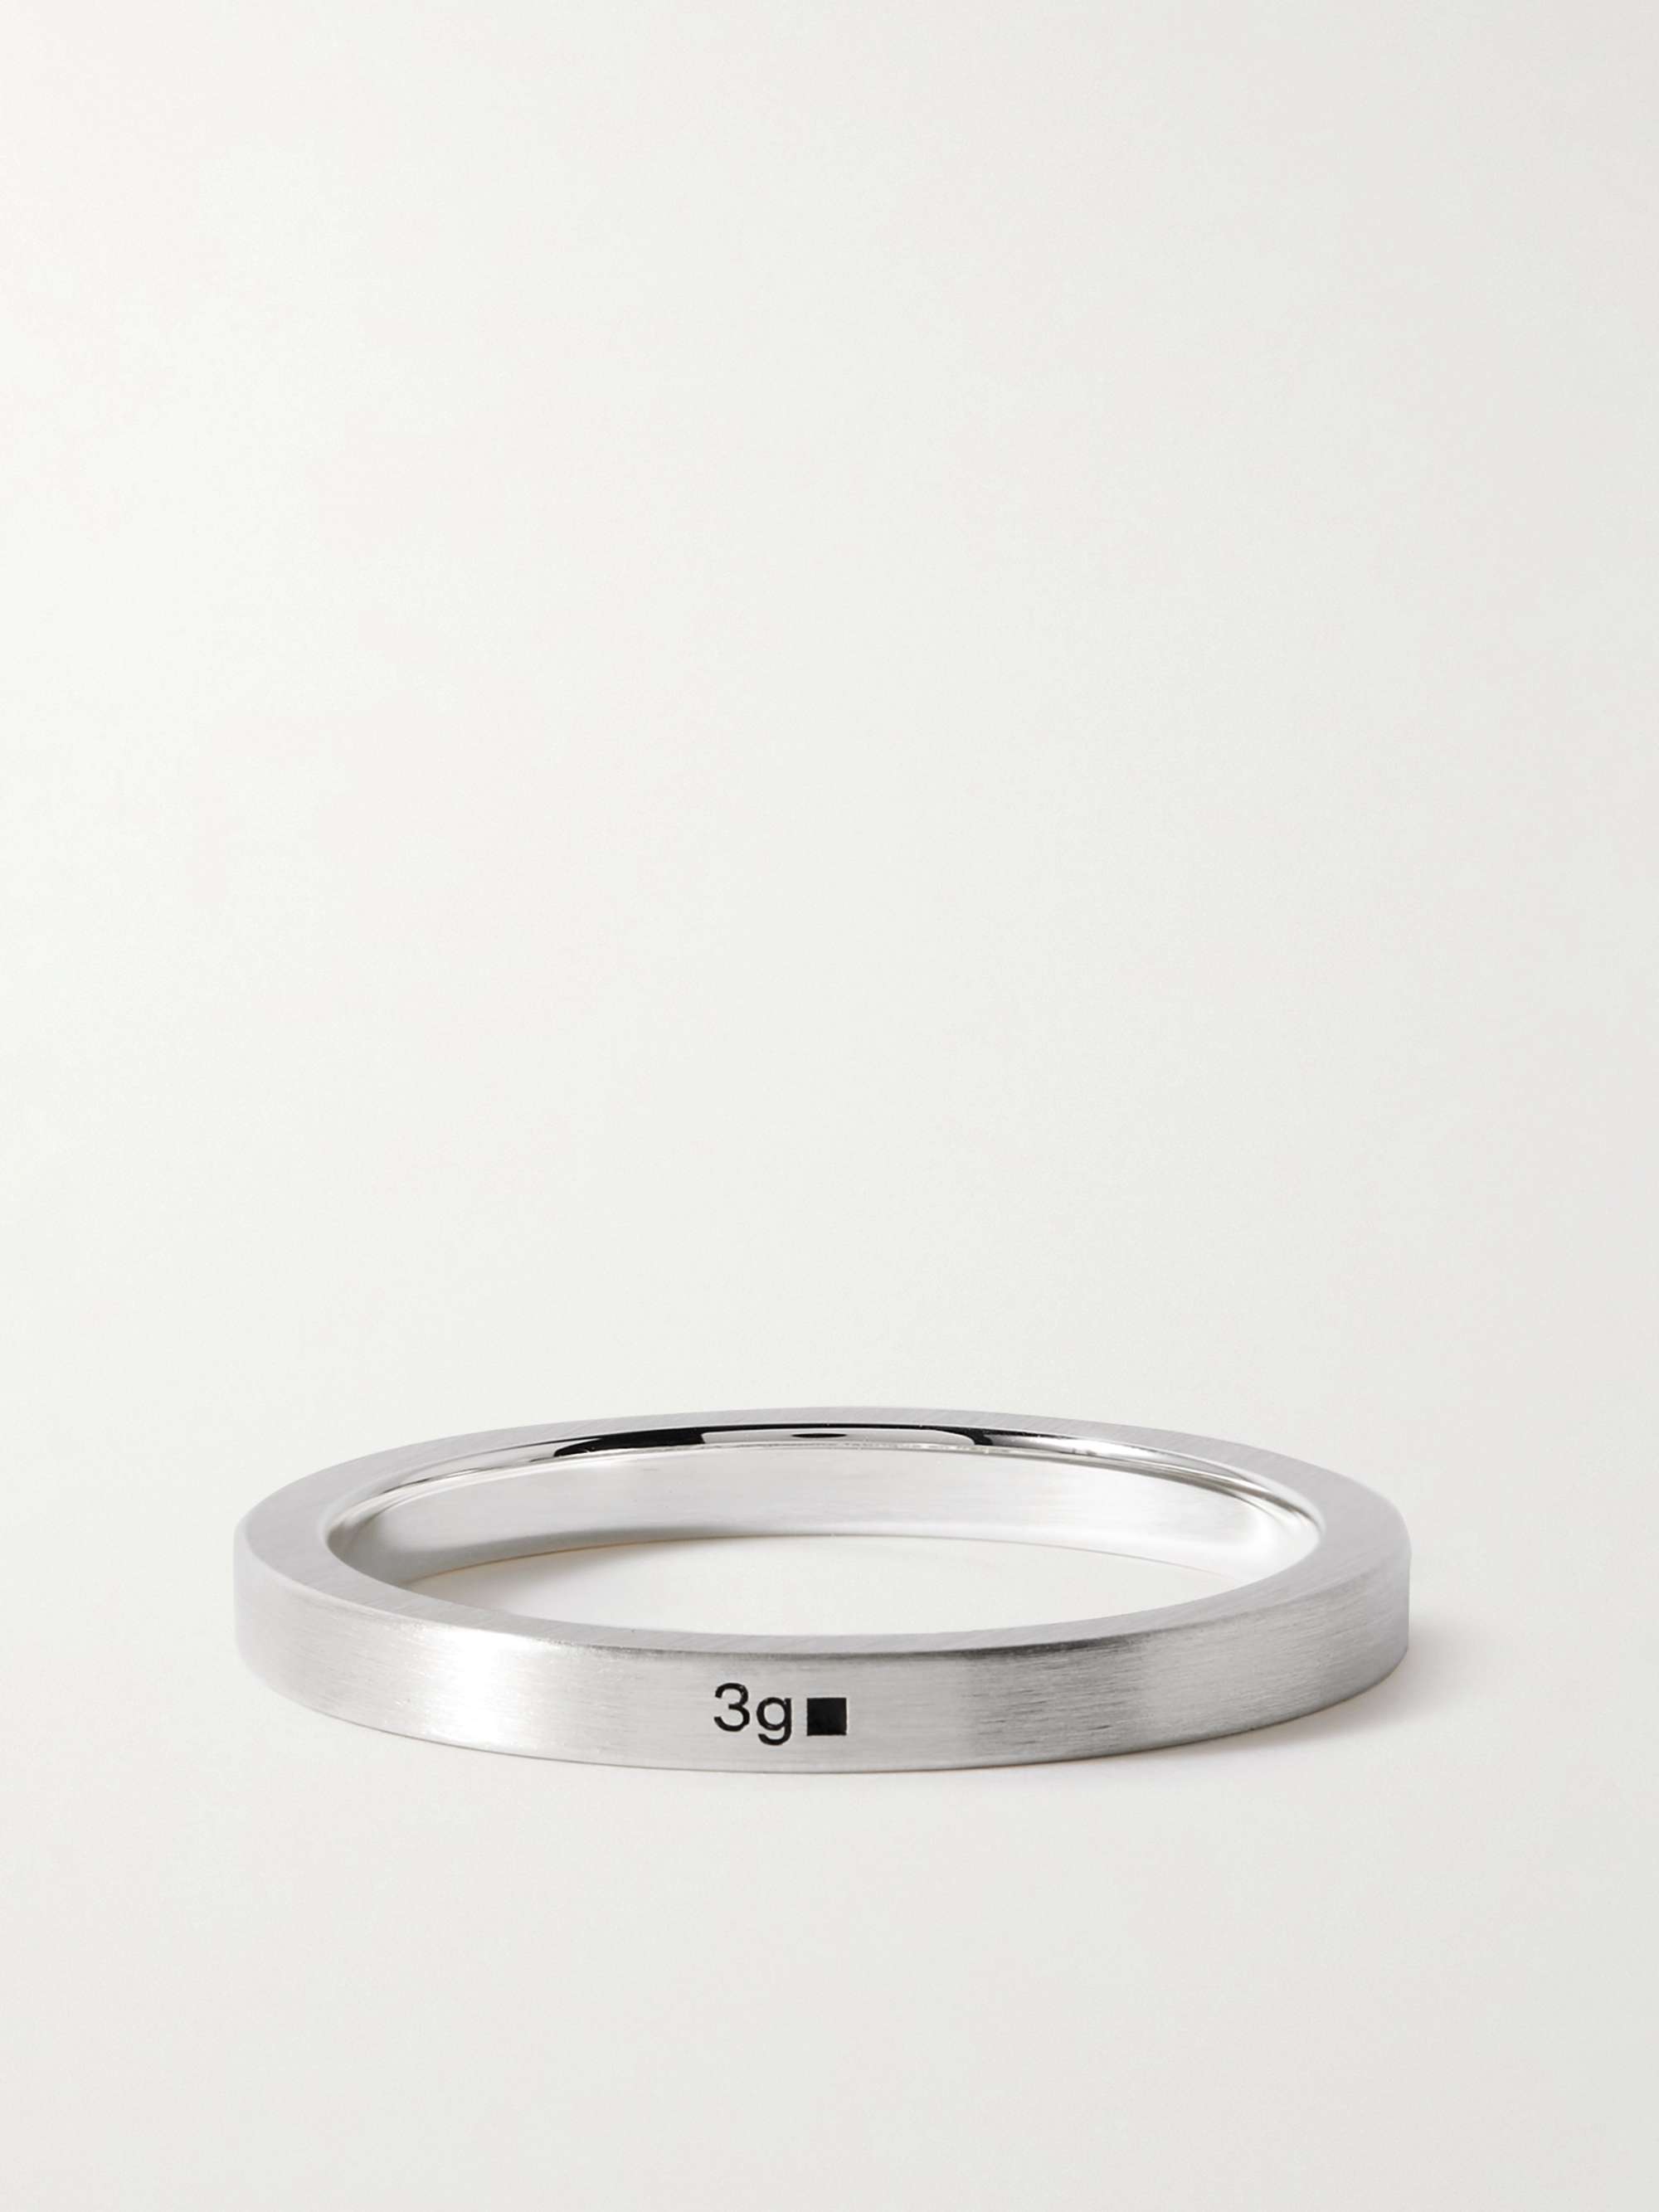 LE GRAMME Le 3 Brushed Sterling Silver Ring